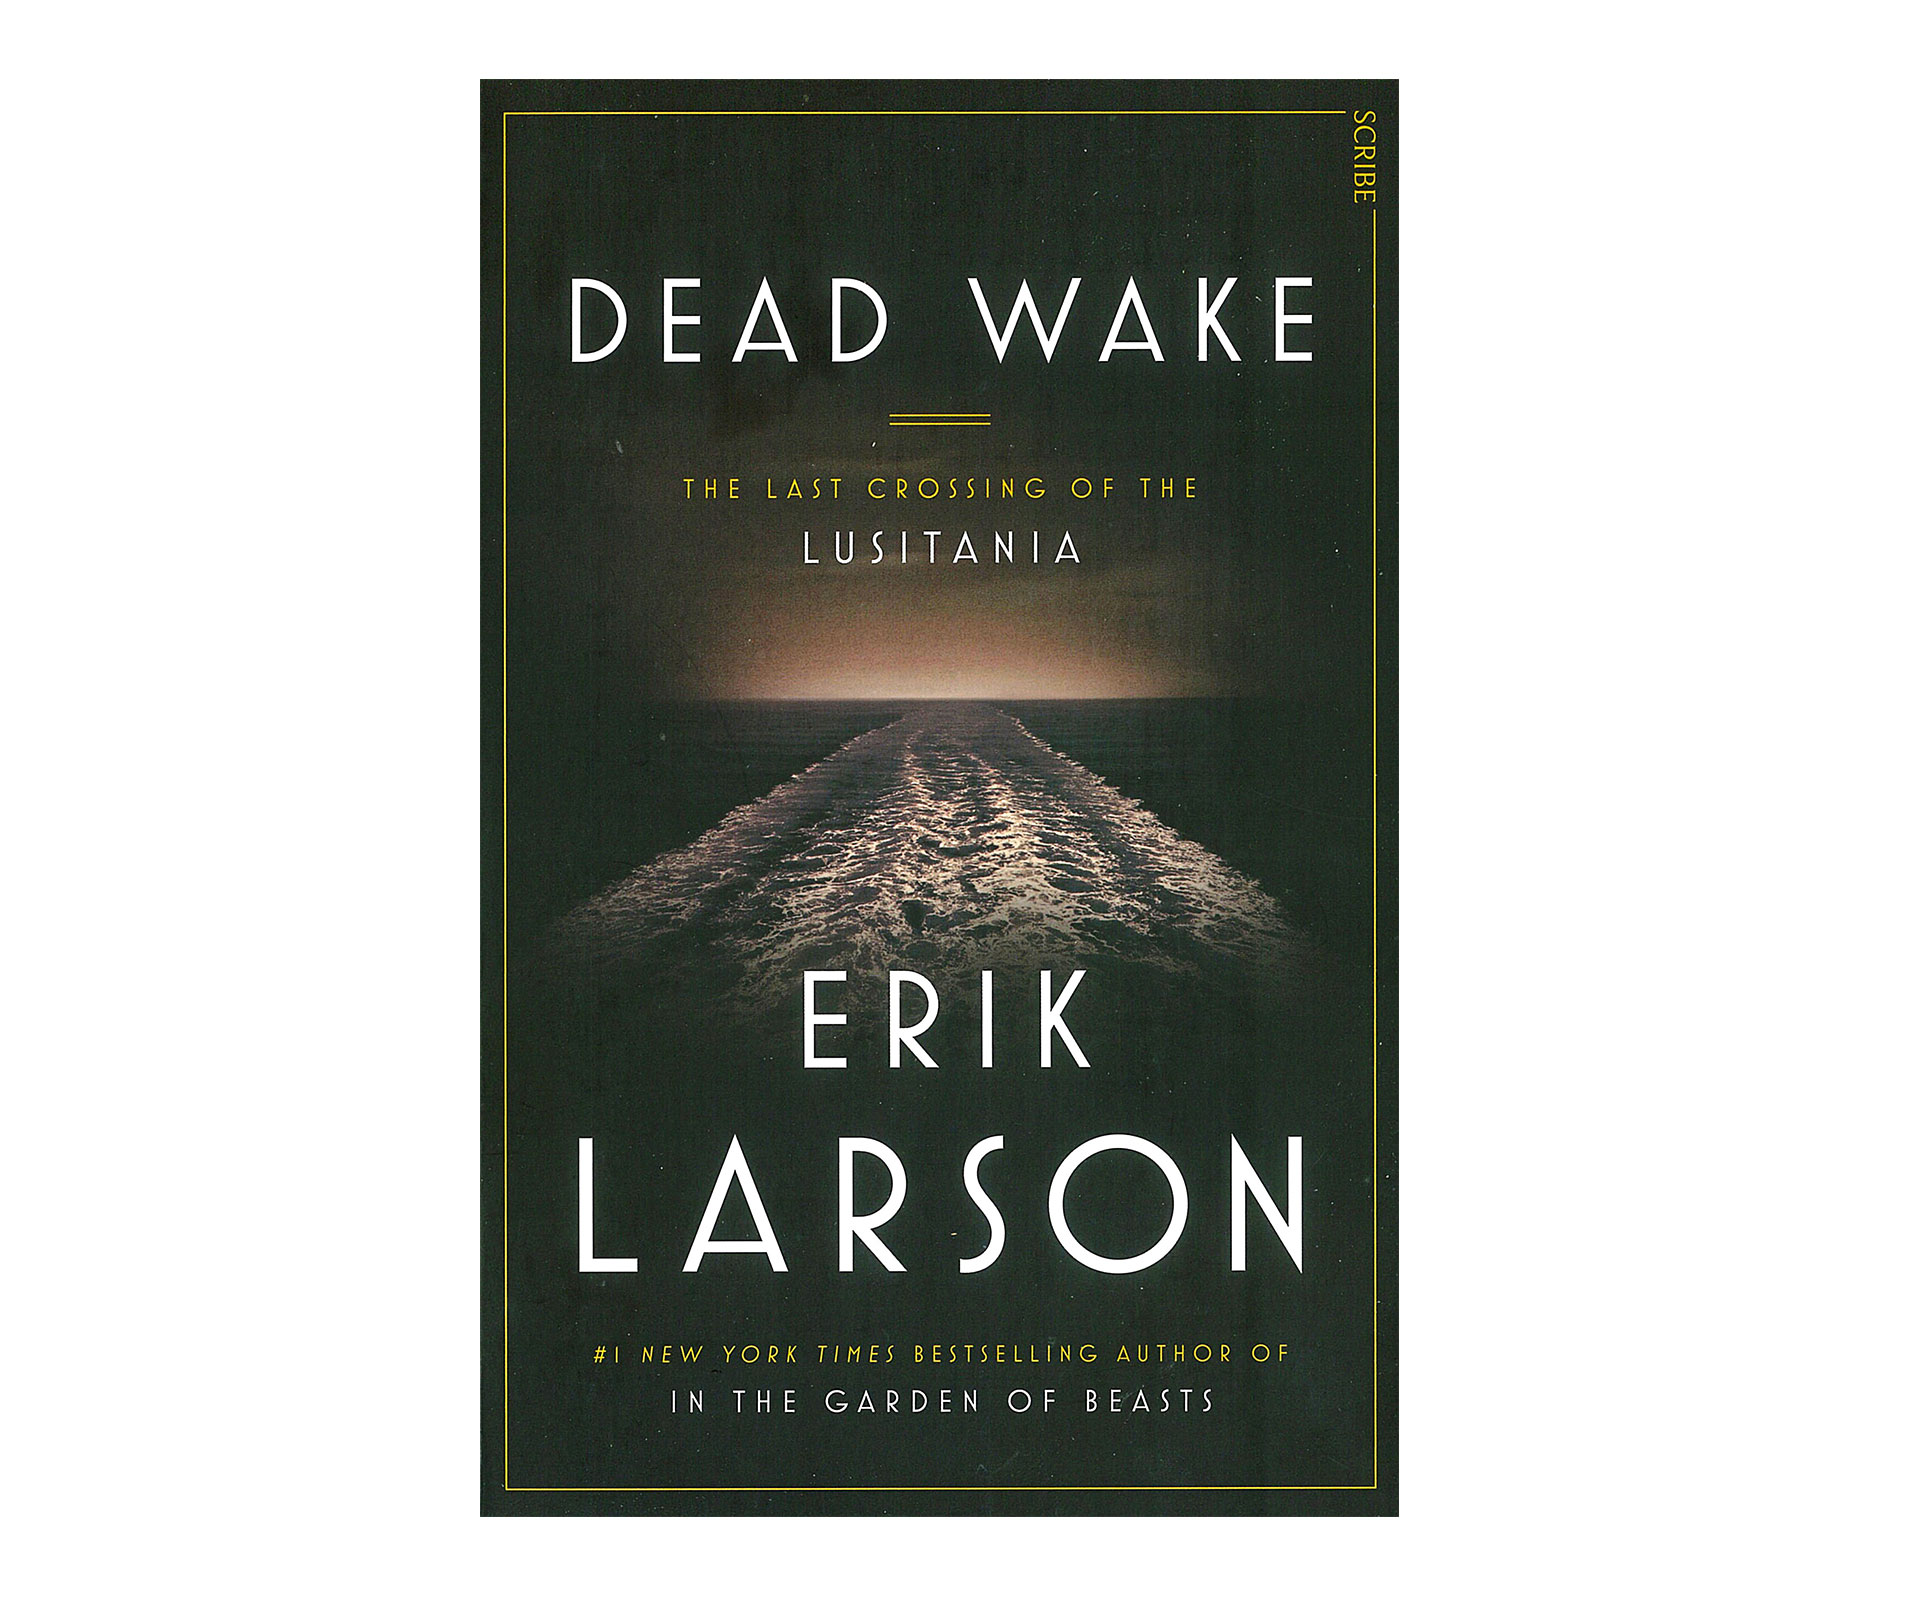 Dead Wake: The Last Crossing of the Lusitania by Eric Larson